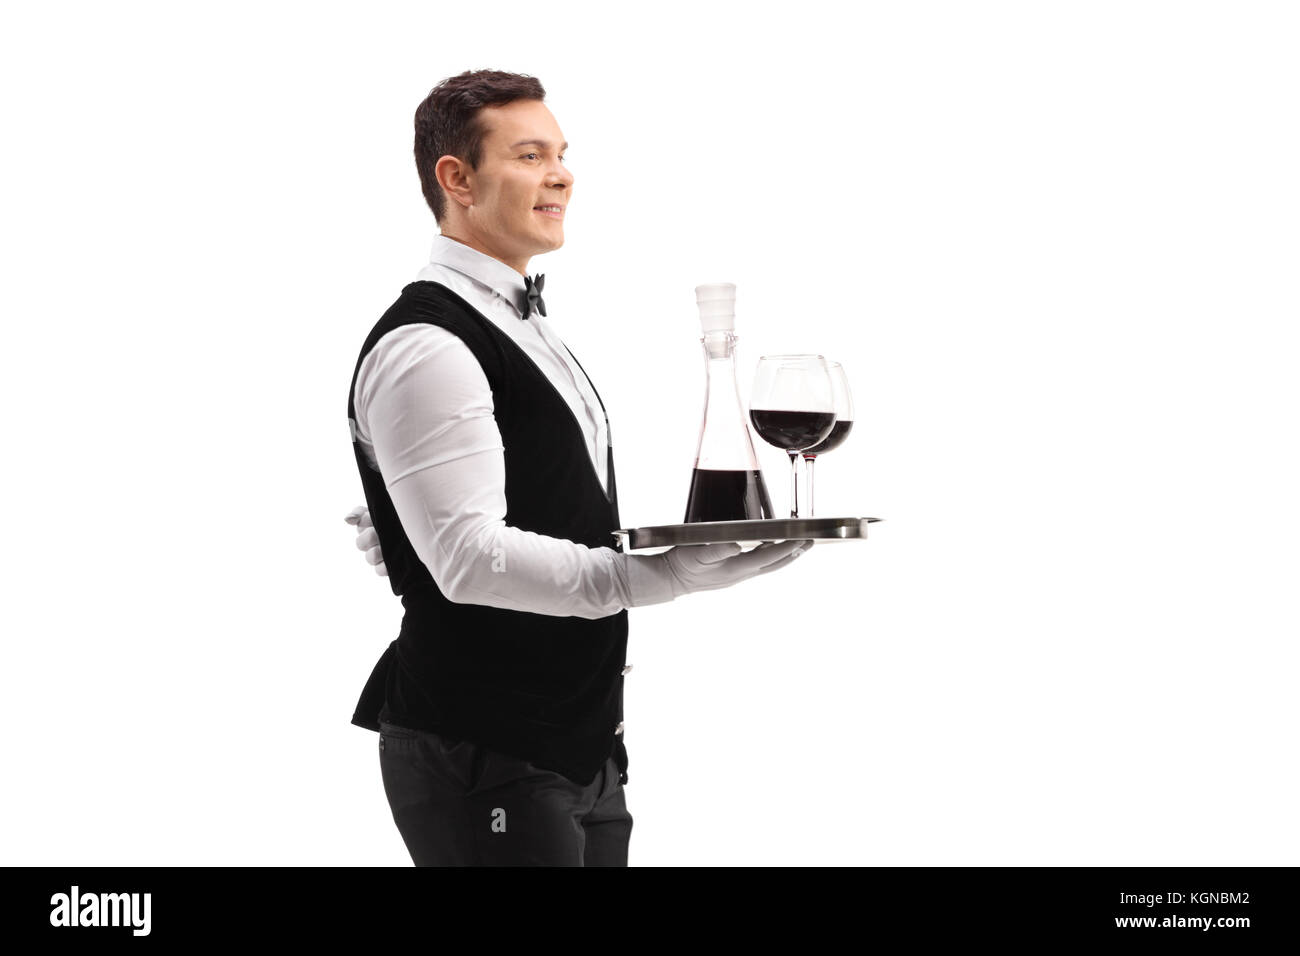 Waiter holding a tray with wine and two glasses isolated on white background Stock Photo